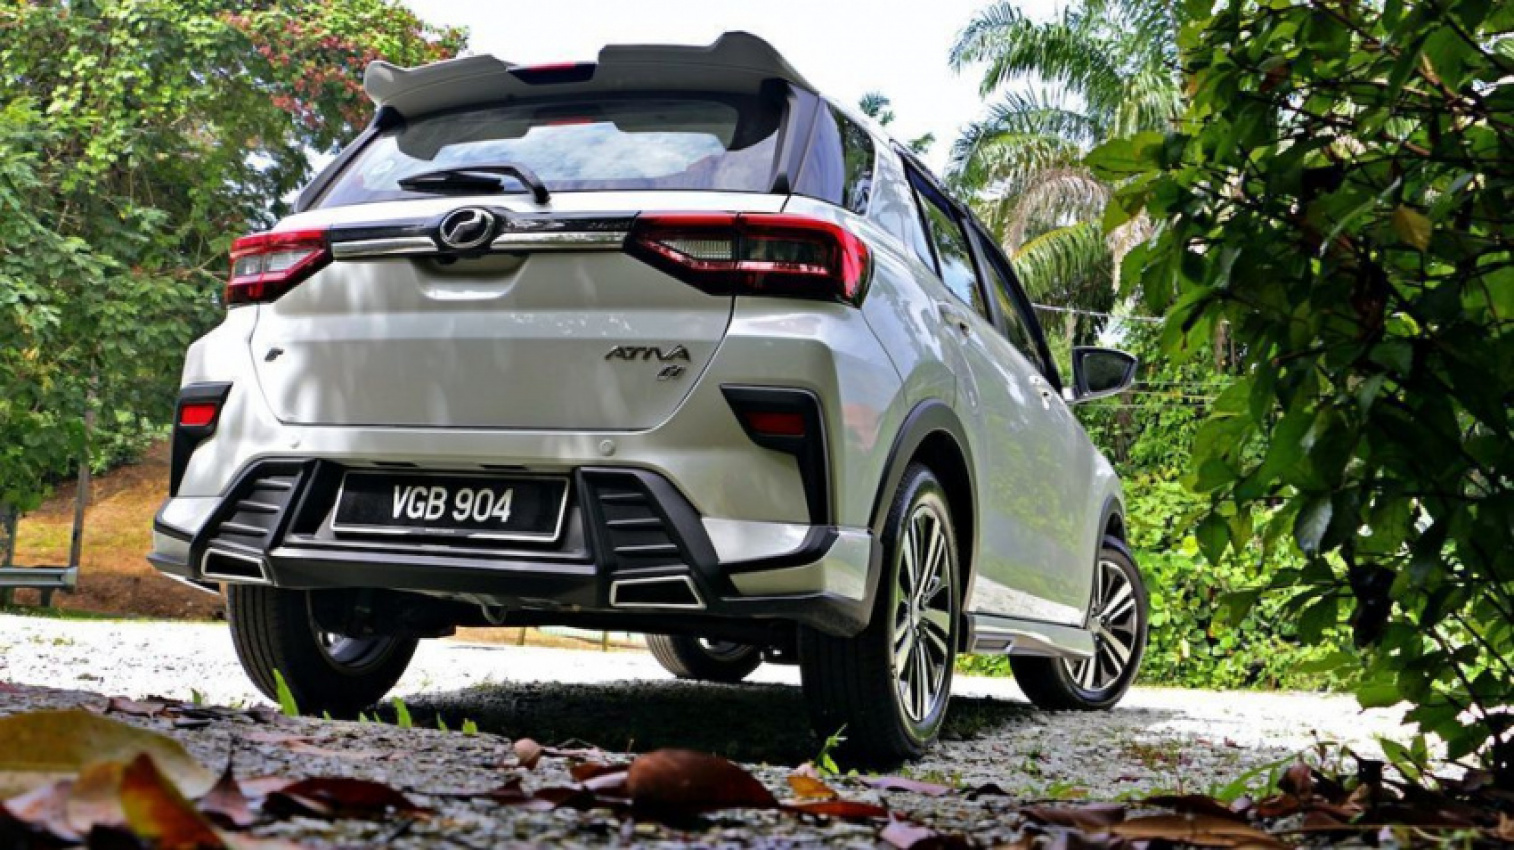 autos, cars, reviews, insights, perodua ativa, perodua ativa eco idle, perodua ativa engine idle, perodua ativa facebook, perodua ativa turbo, perodua ativa turbo care, turbocharged engines, turbochargers, does the turbocharged engine of the perodua ativa need to cool before turning off?